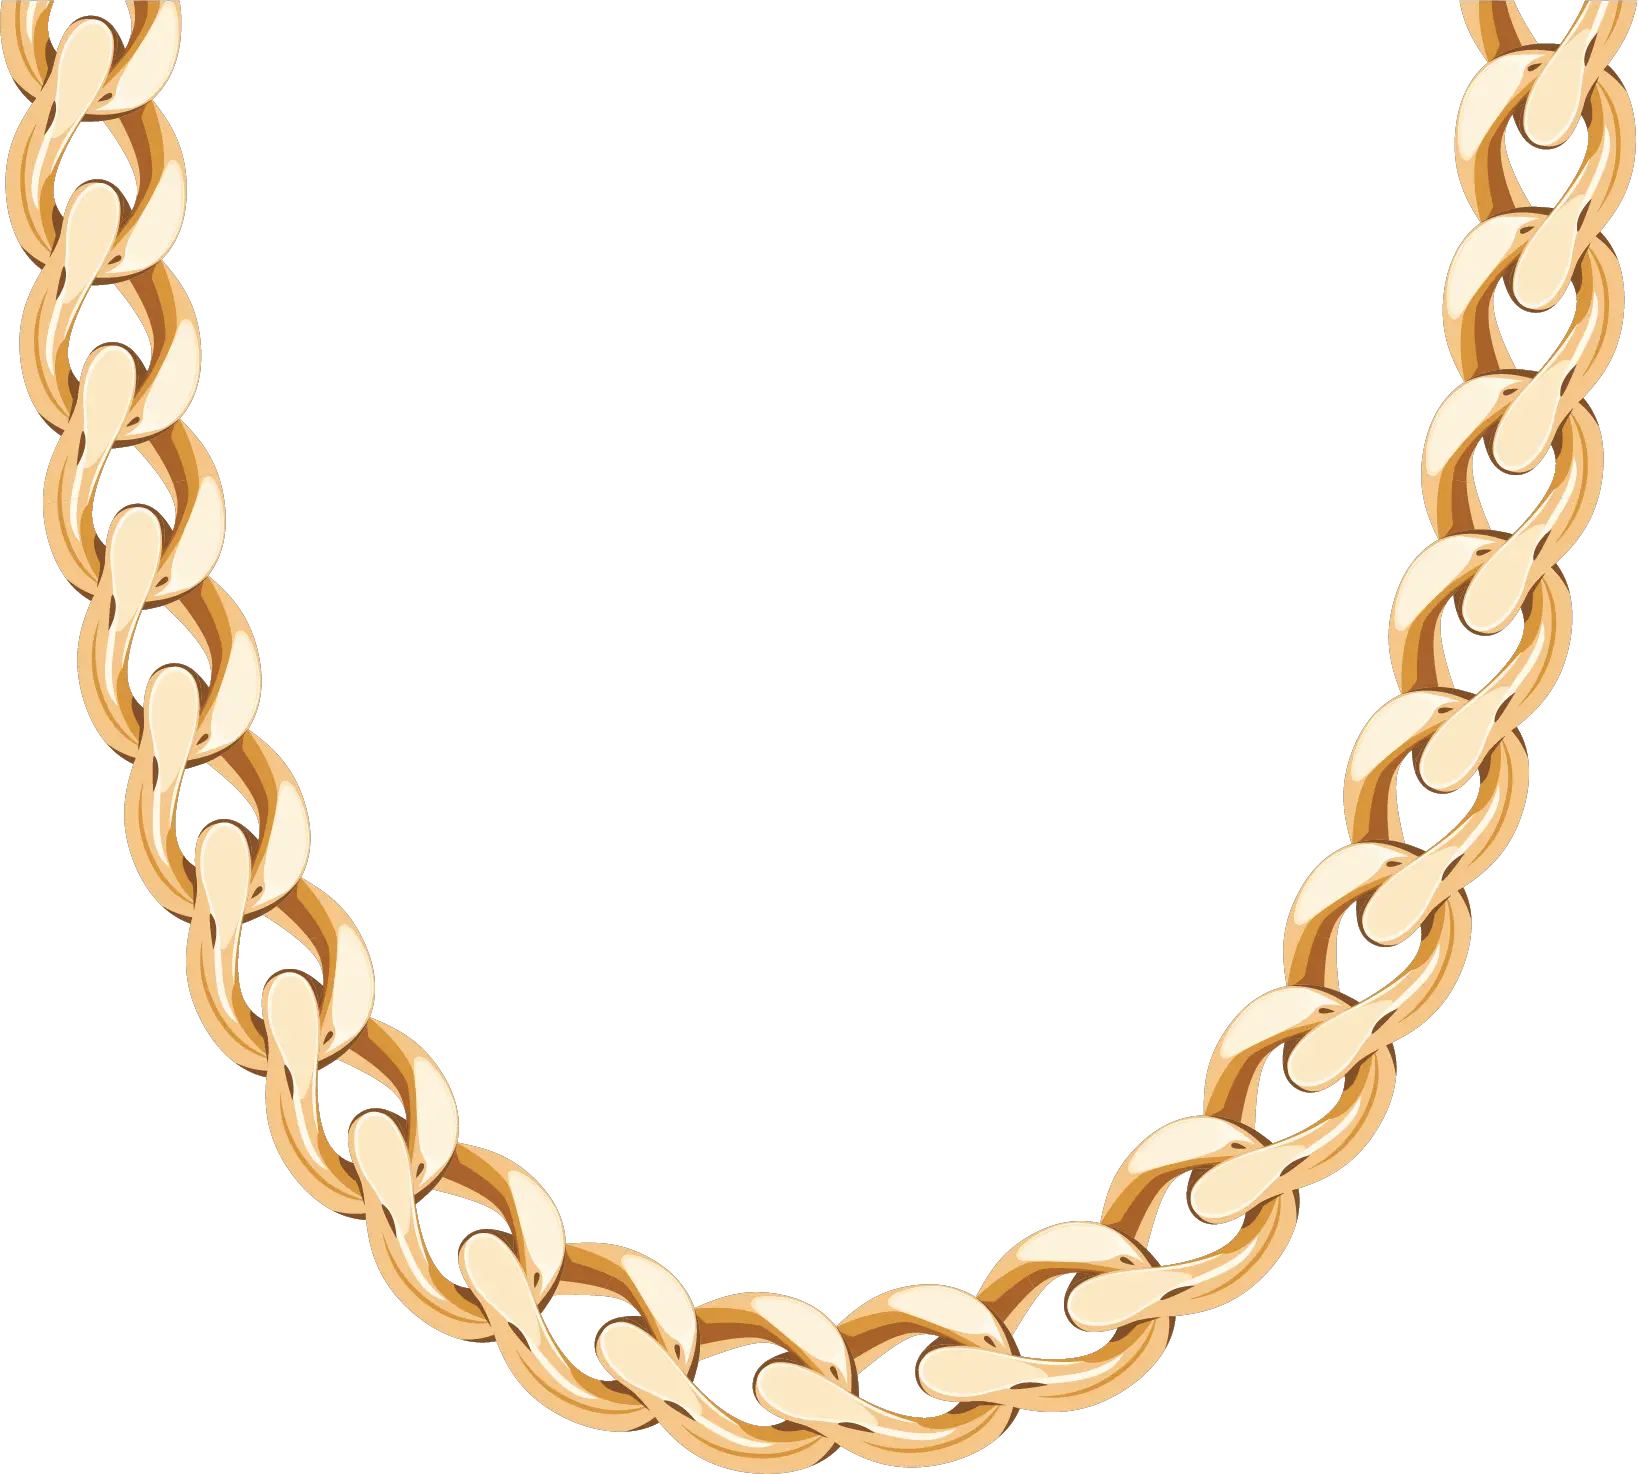 Money Chain Png